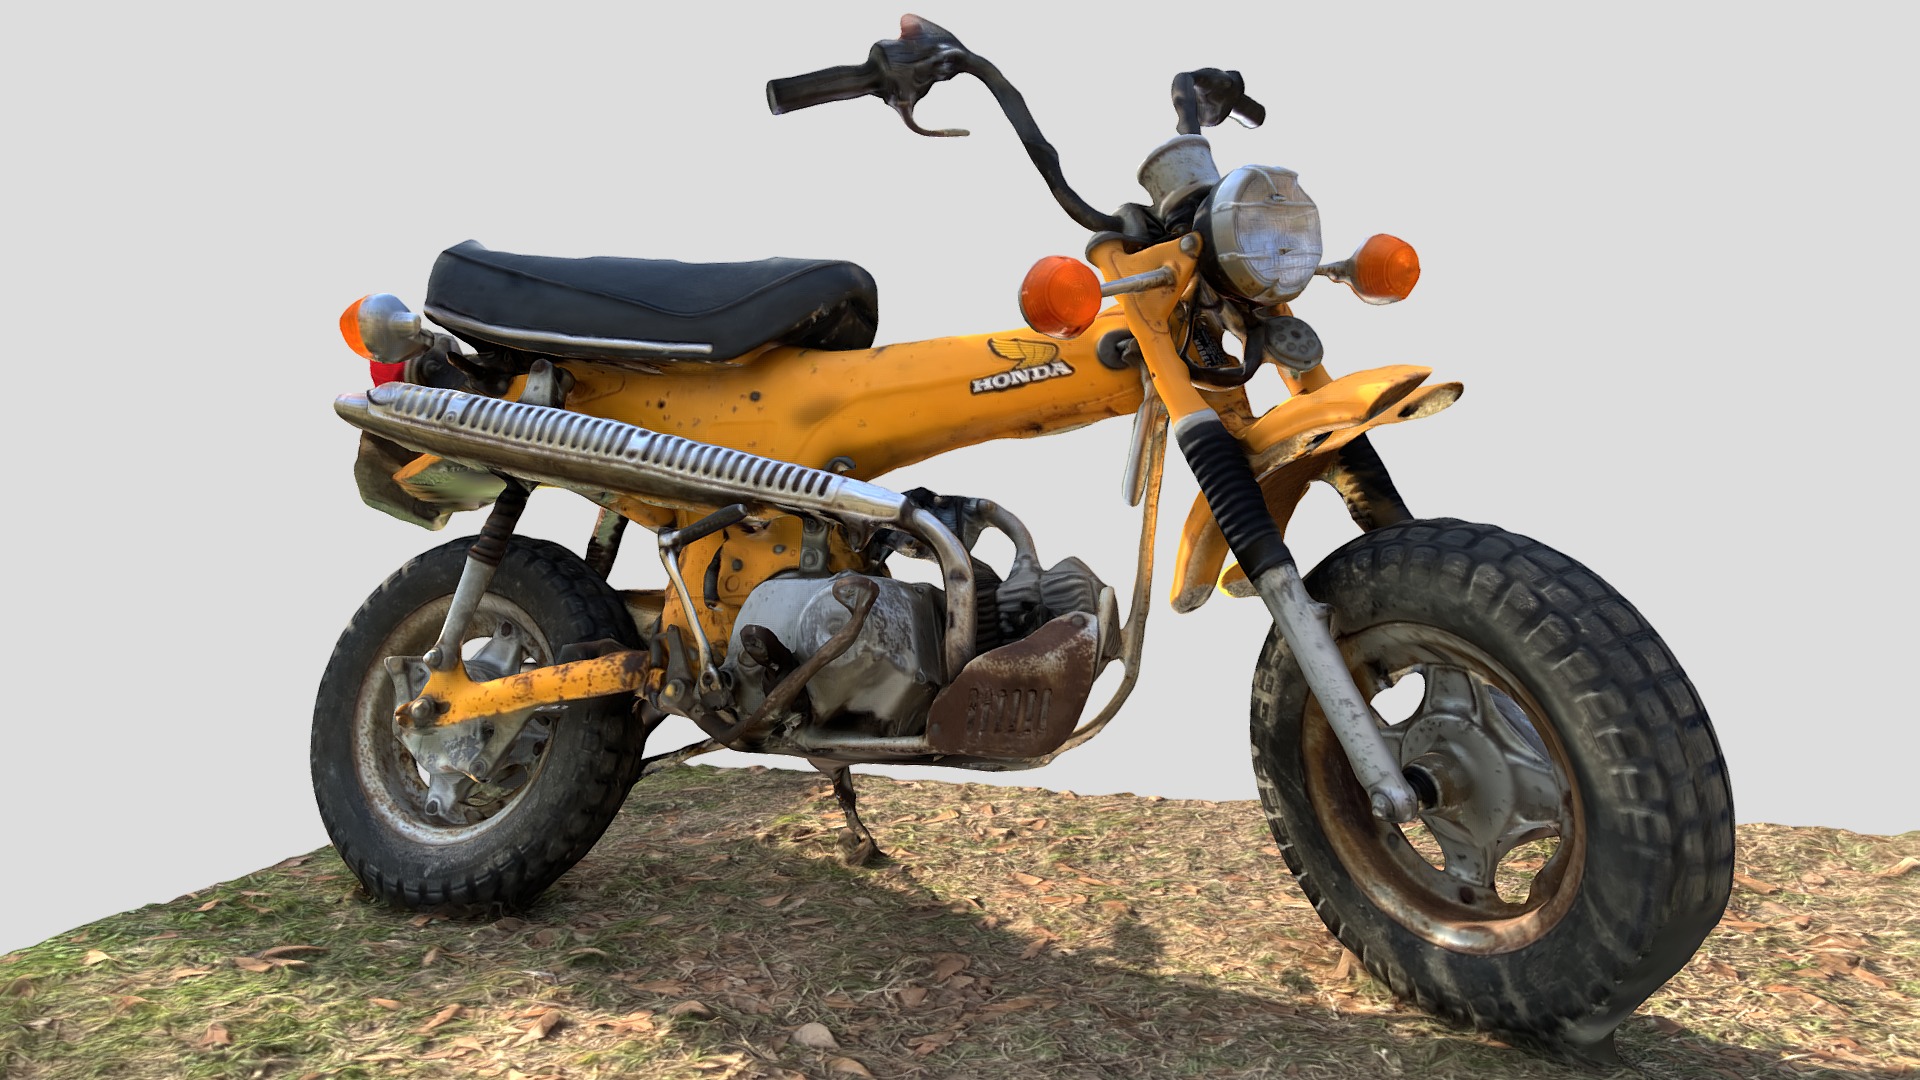 3D model 1979 Honda Bike - This is a 3D model of the 1979 Honda Bike. The 3D model is about a motorcycle parked on a dirt hill.